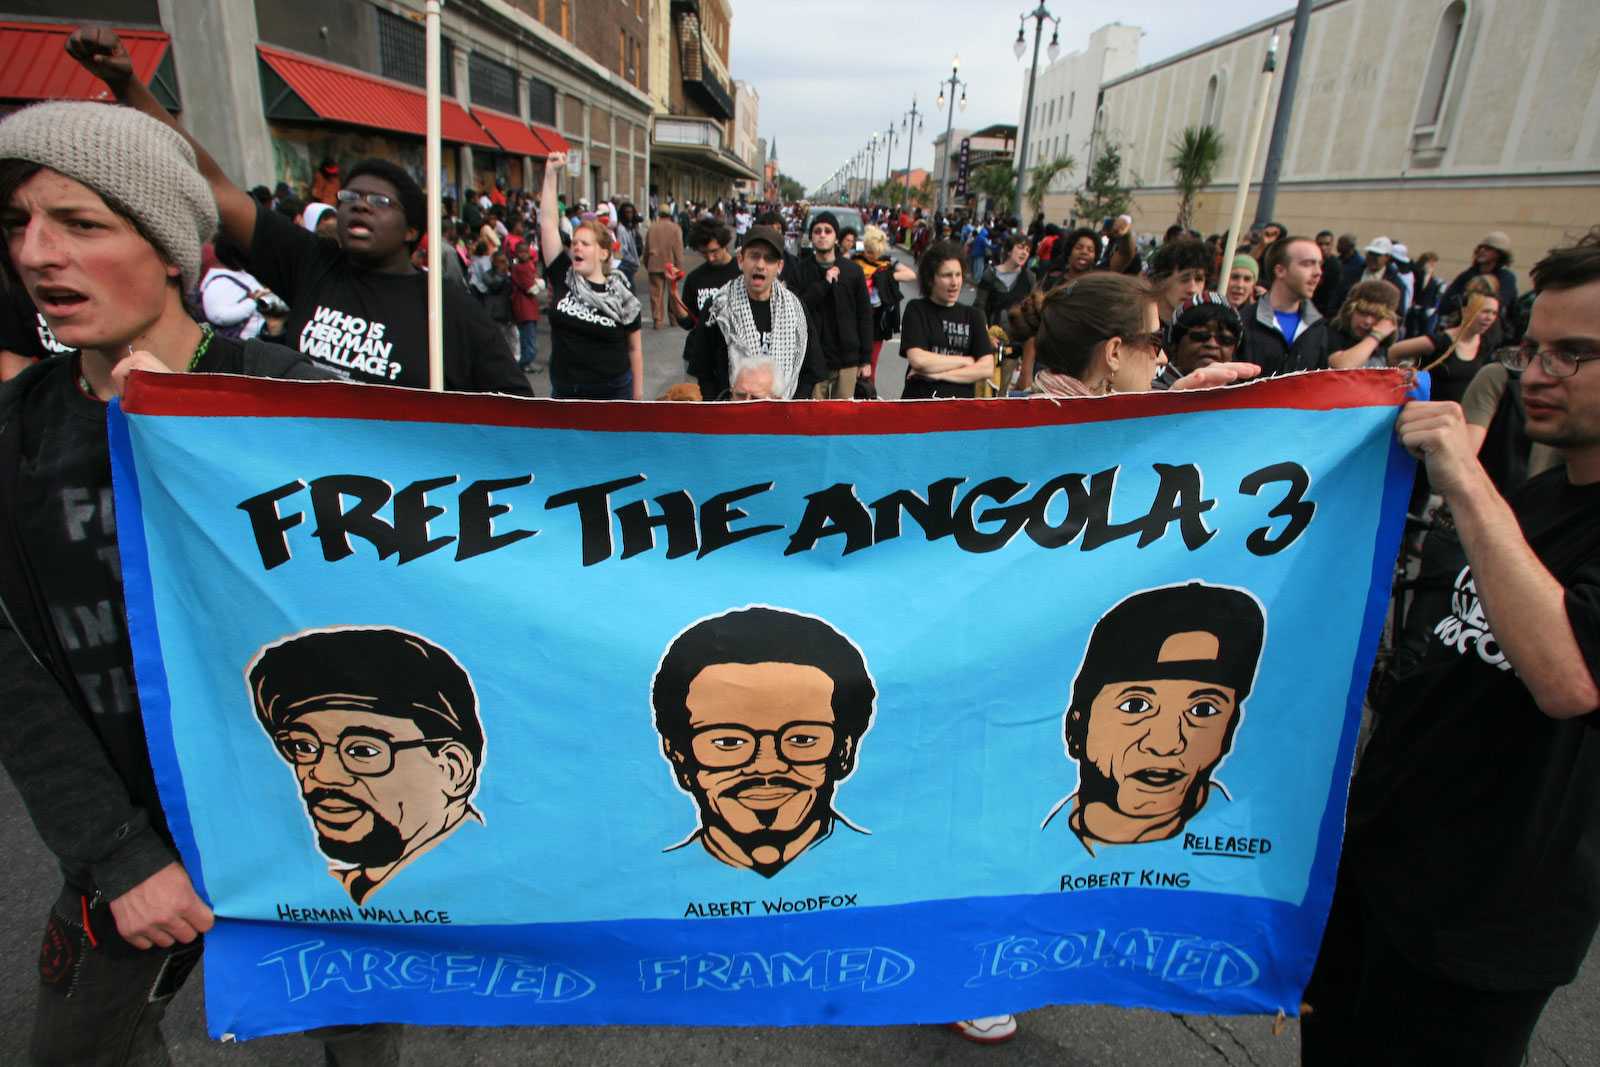 Two people walking in a protesting holding a large blue sign that says "Free the Angola Three".